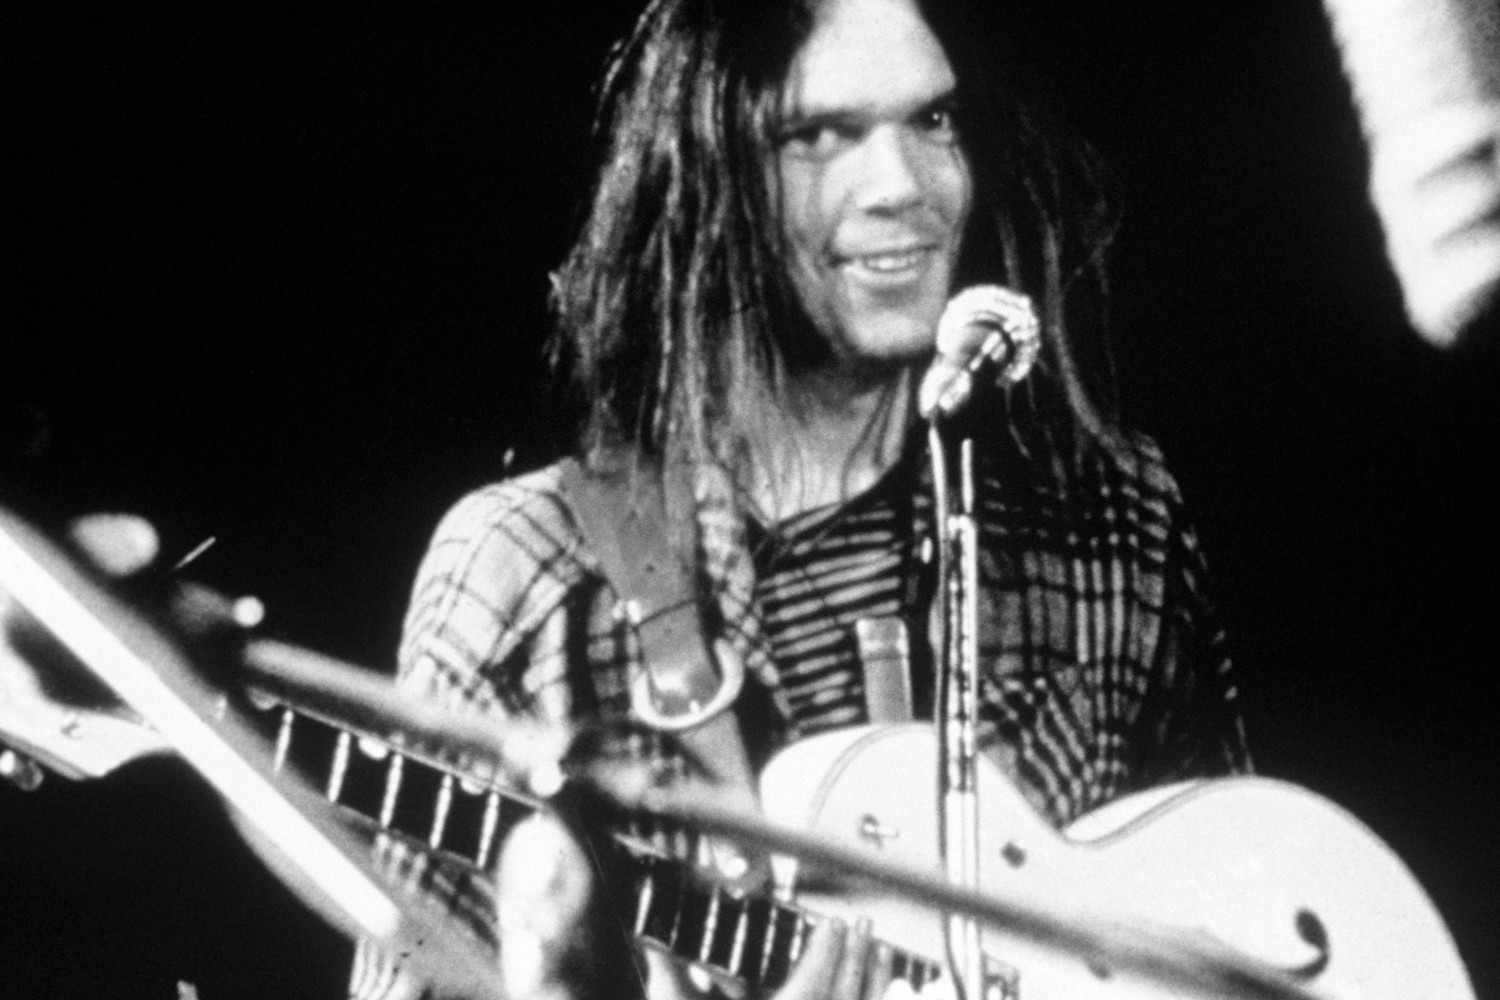 The Next Neil Young Archival Release Revisits the Early Days of Crazy Horse